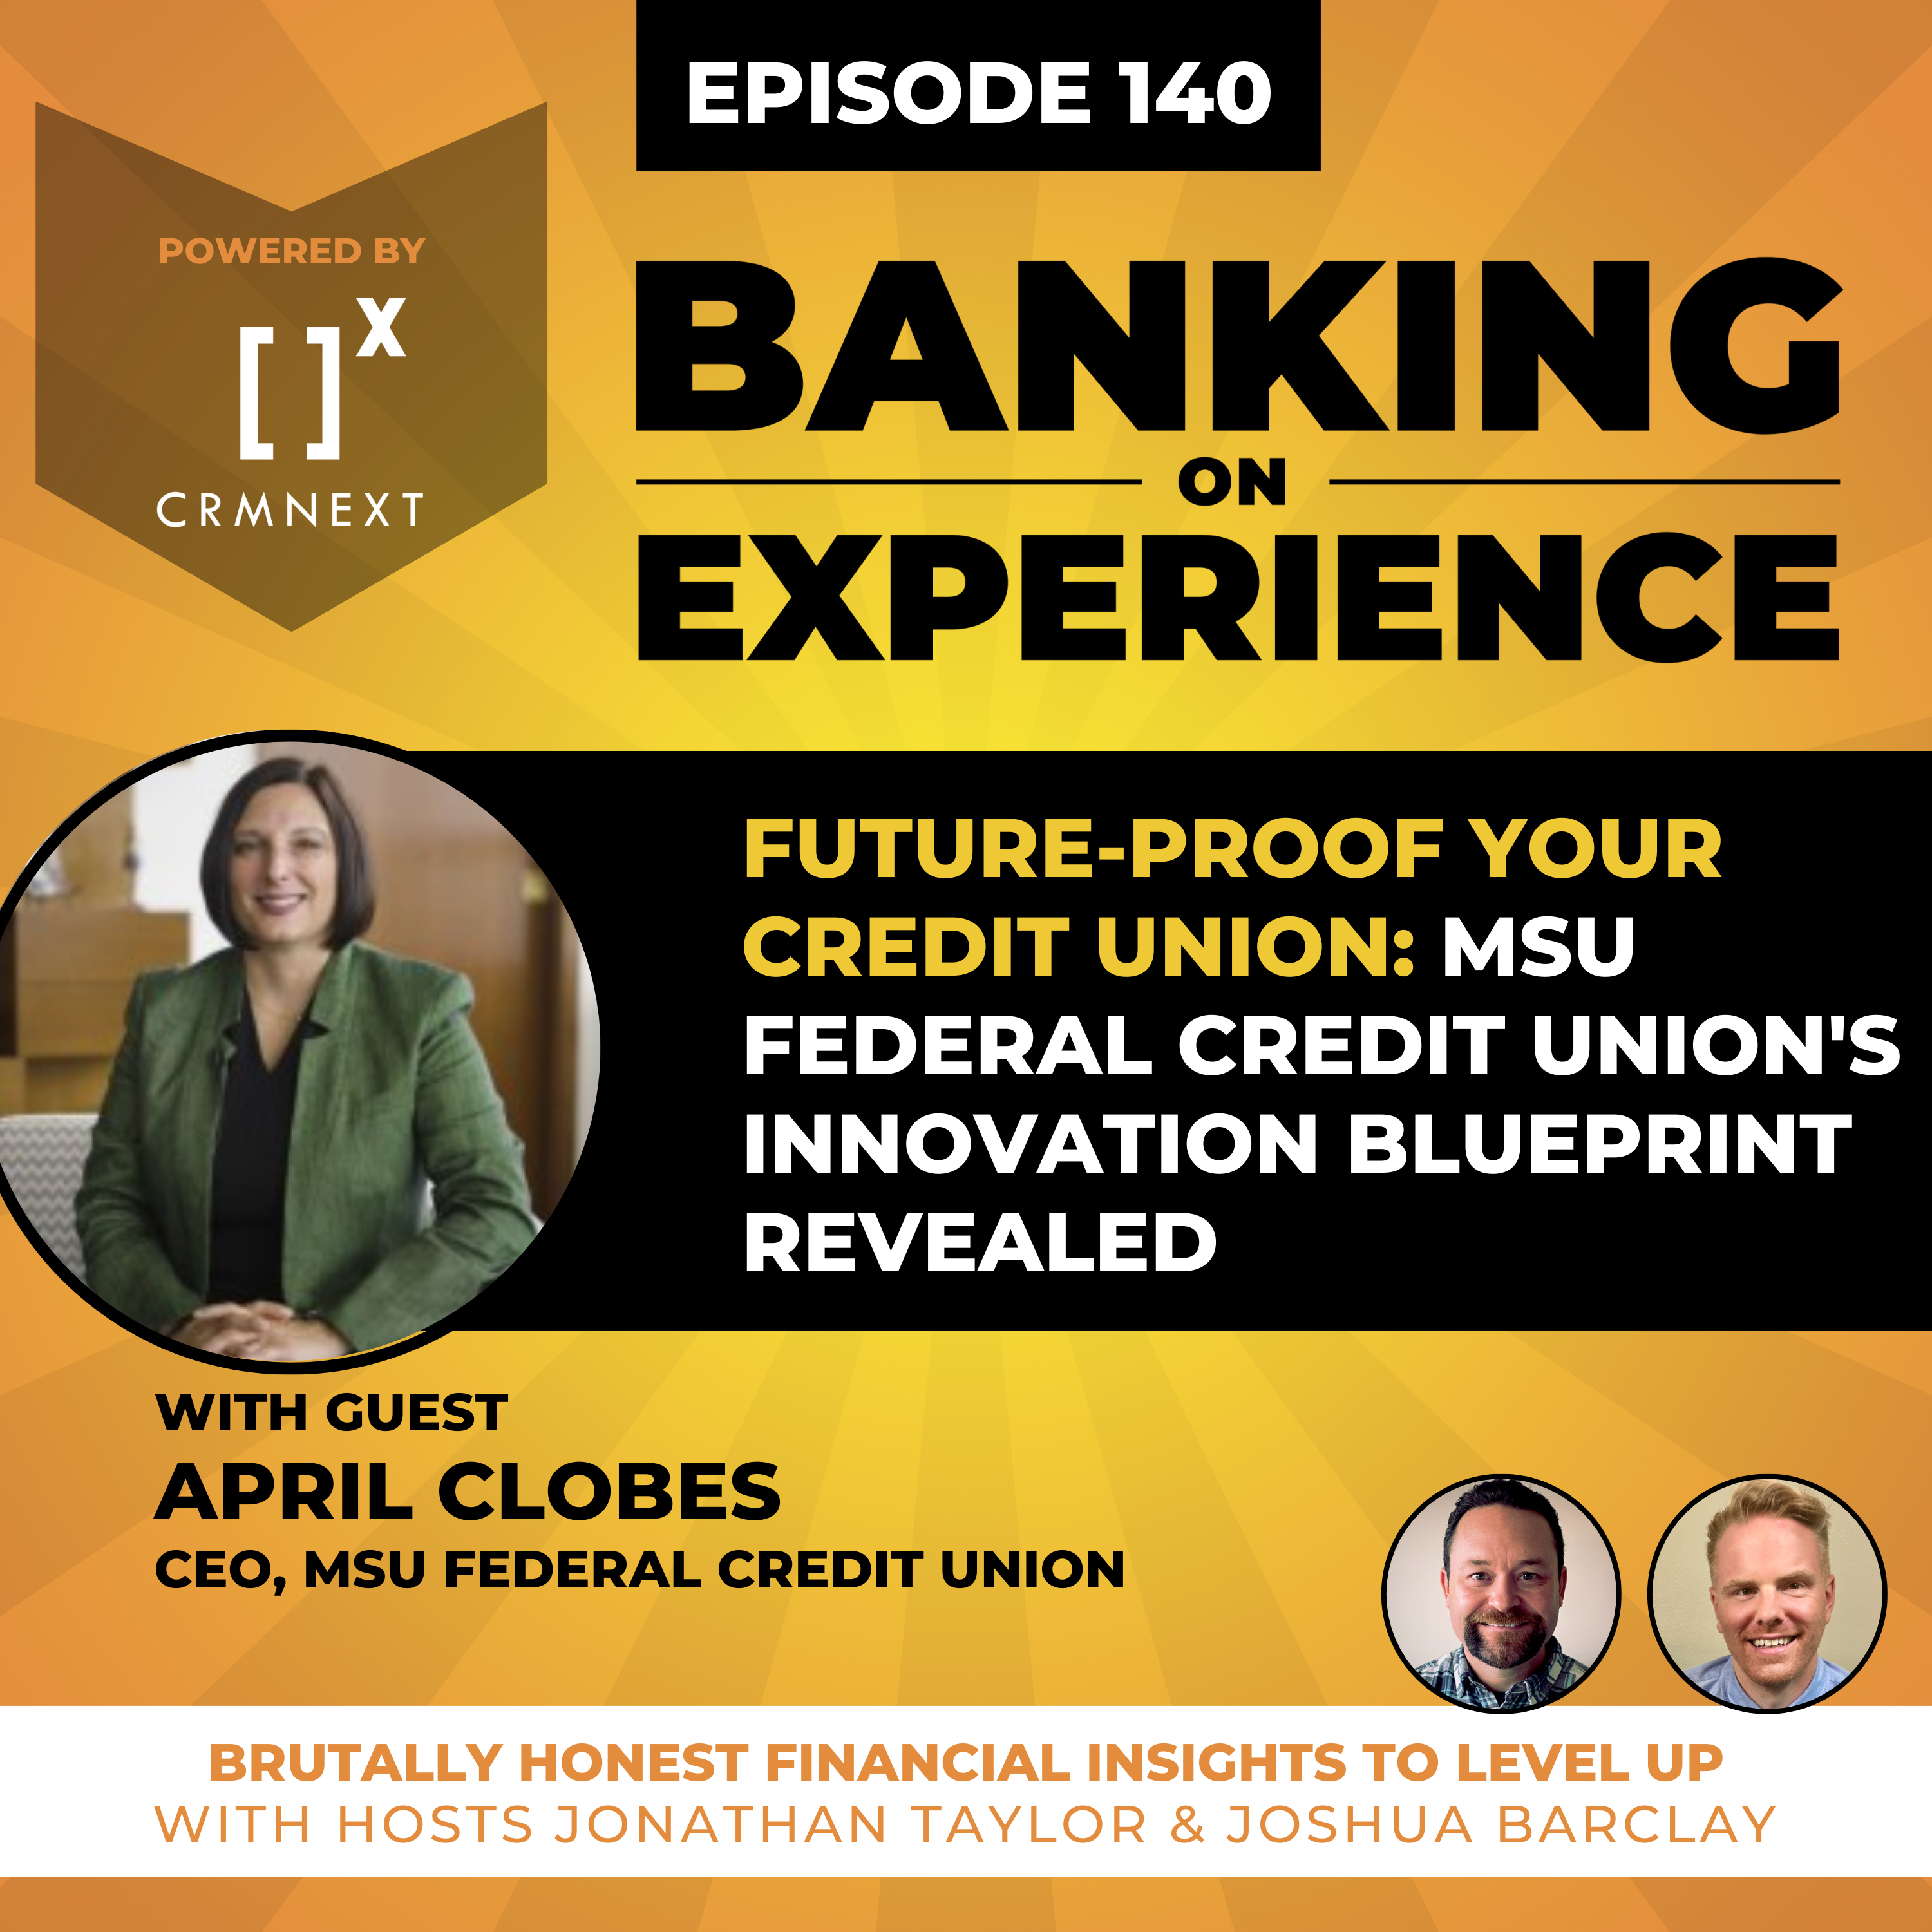 Future-Proof Your Credit Union: MSU Federal Credit Union’s Innovation Blueprint Revealed